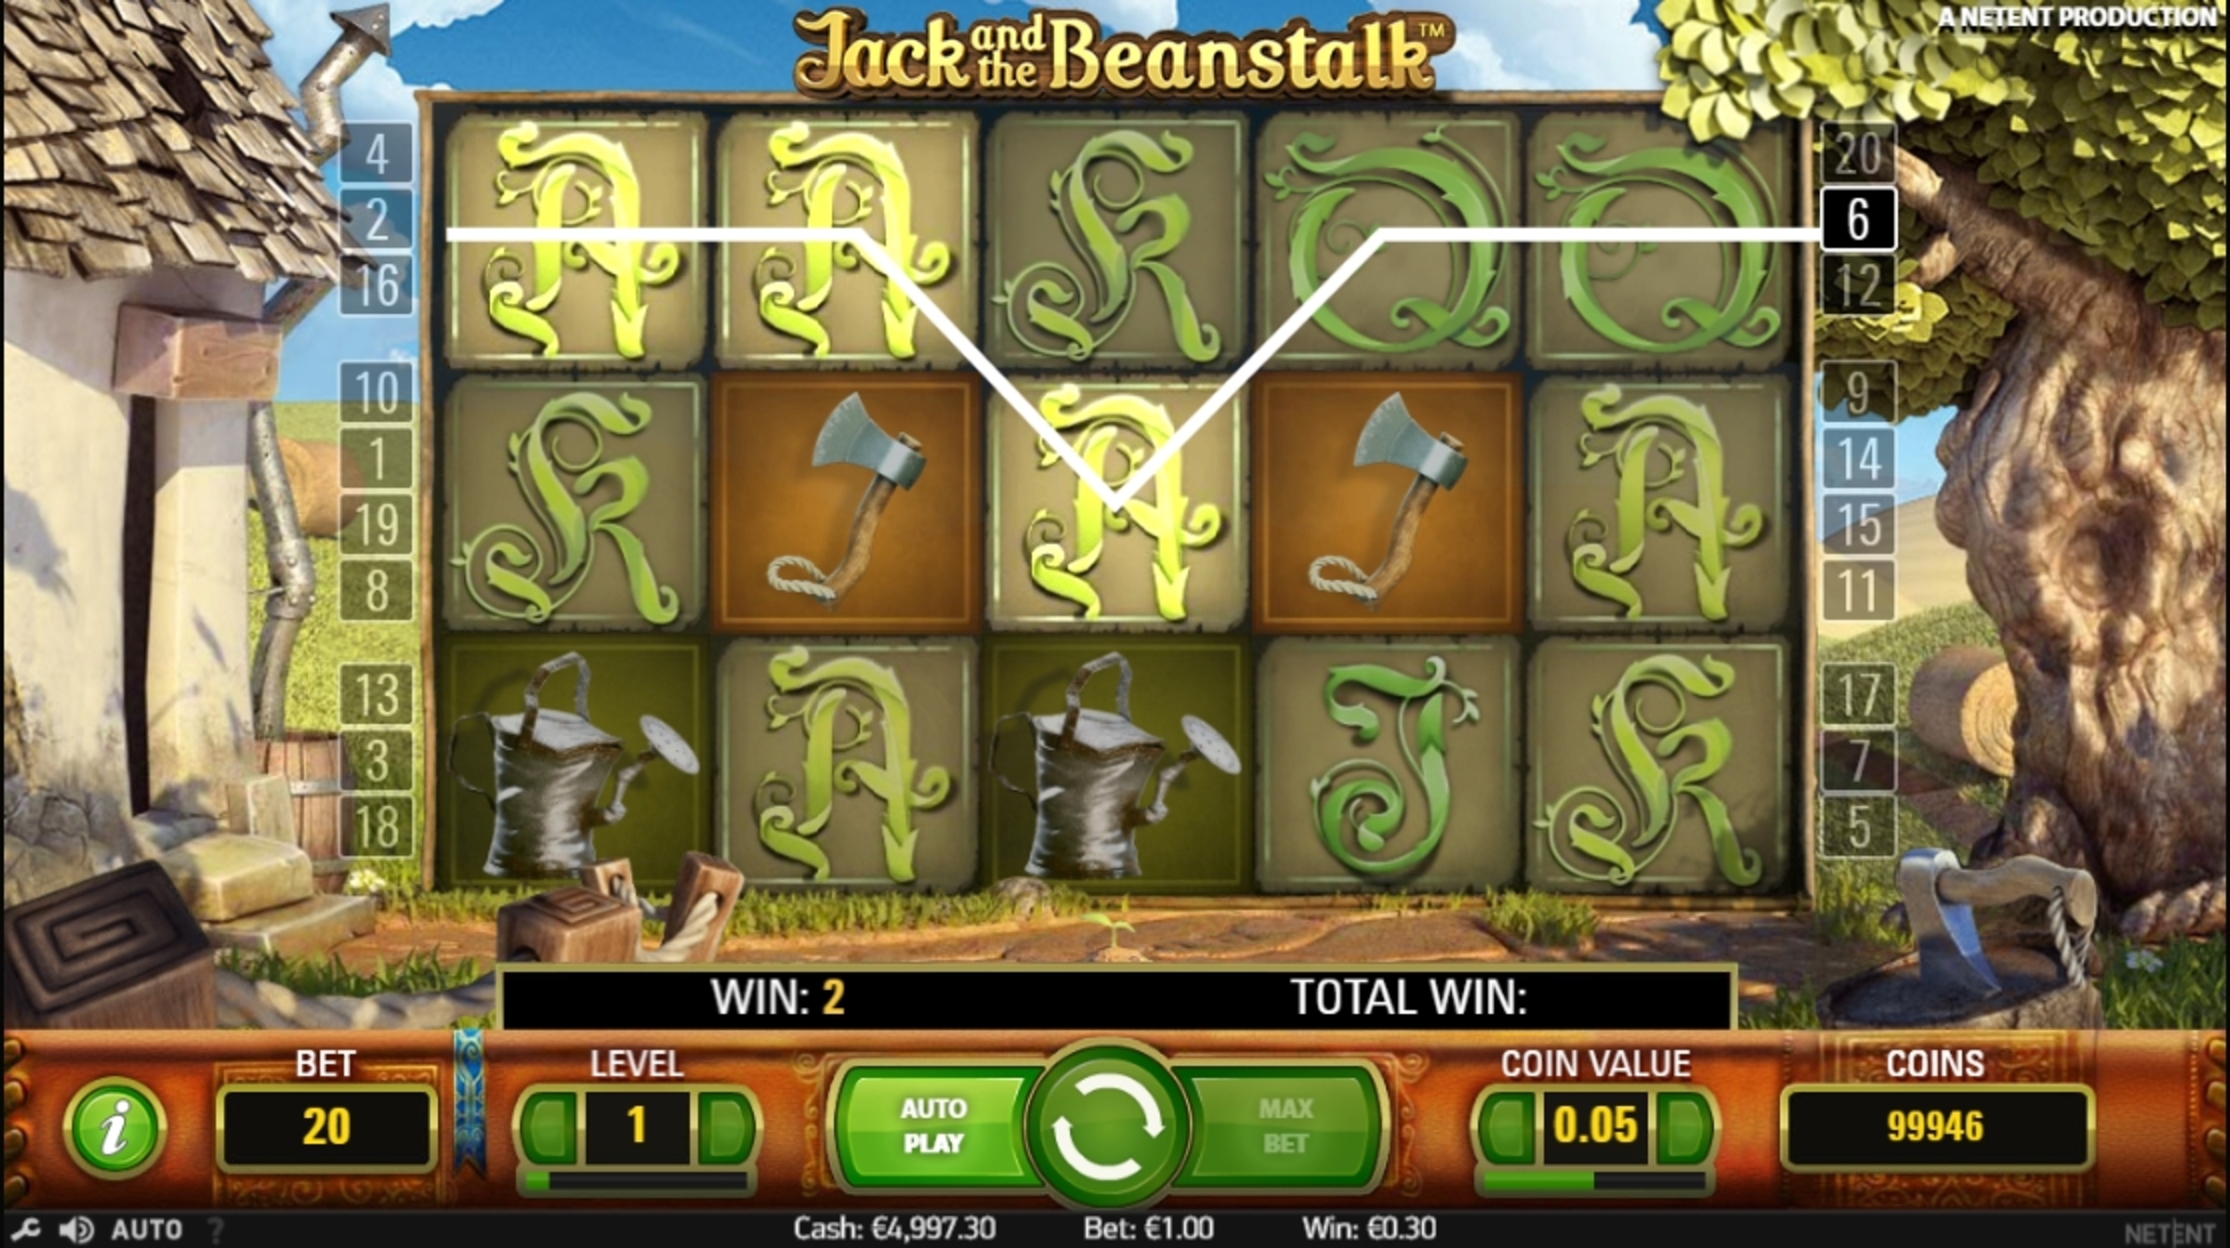 Win Money in Jack and the Beanstalk Free Slot Game by NetEnt